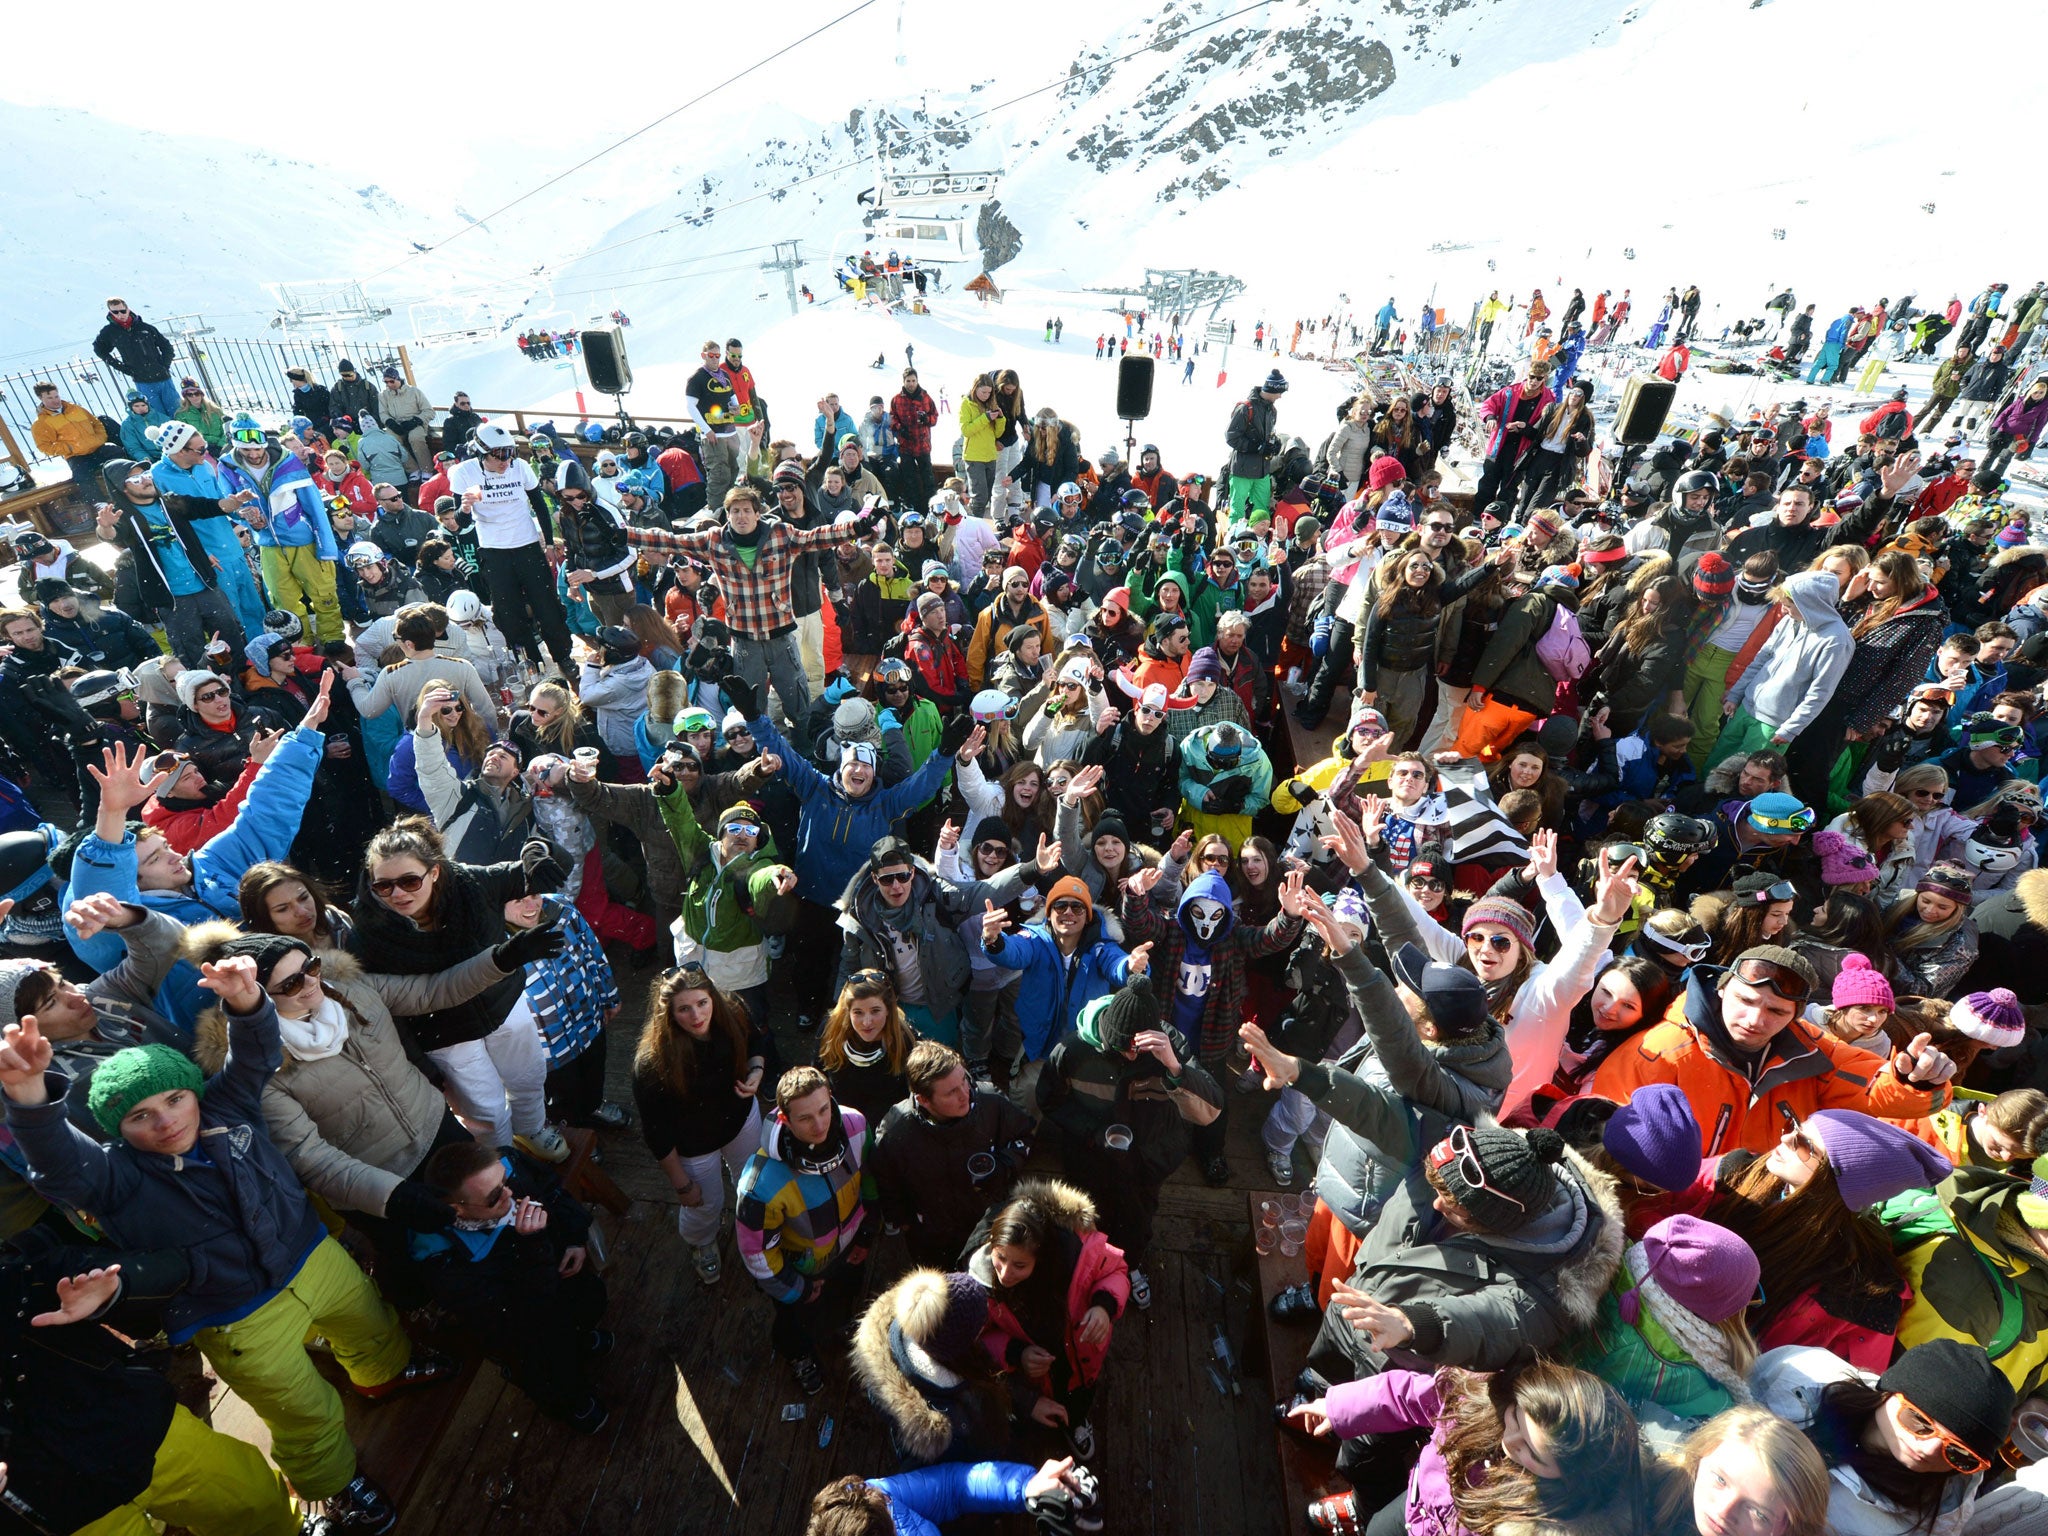 People drink and dance on an outdoor dance floor on the French Alps.